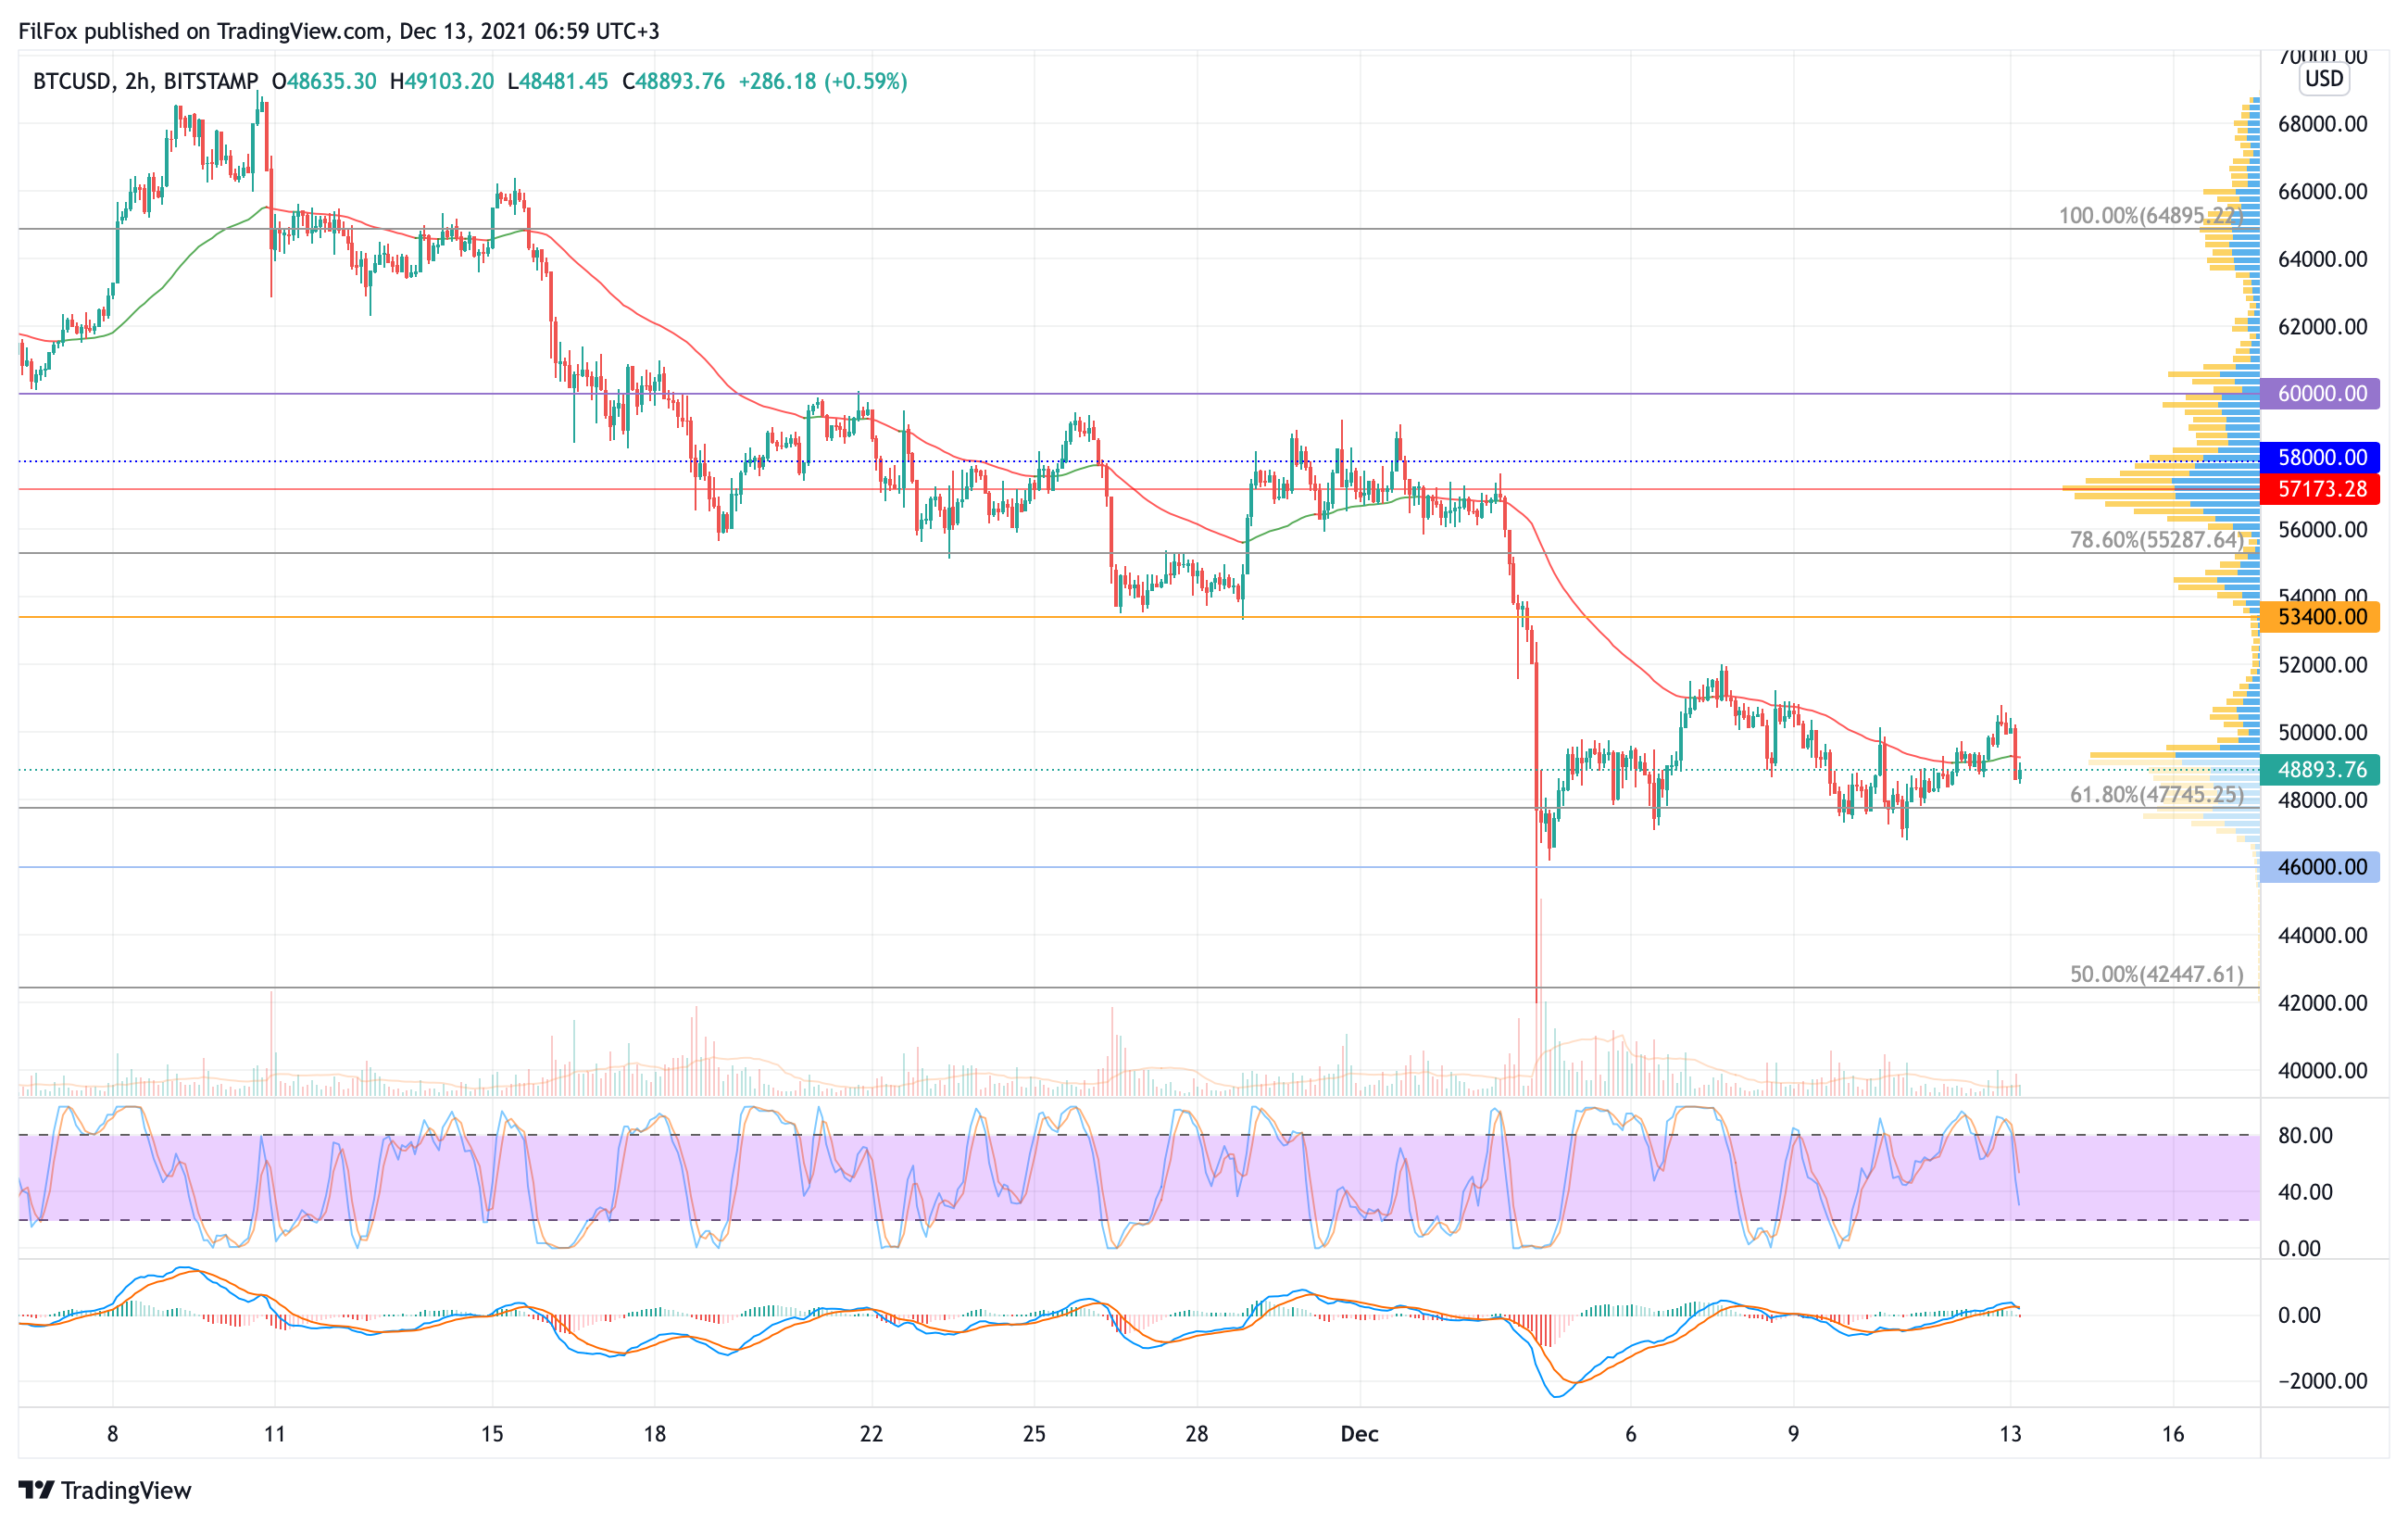 Analysis of the prices of Bitcoin, Ethereum, XRP for 12/13/2021